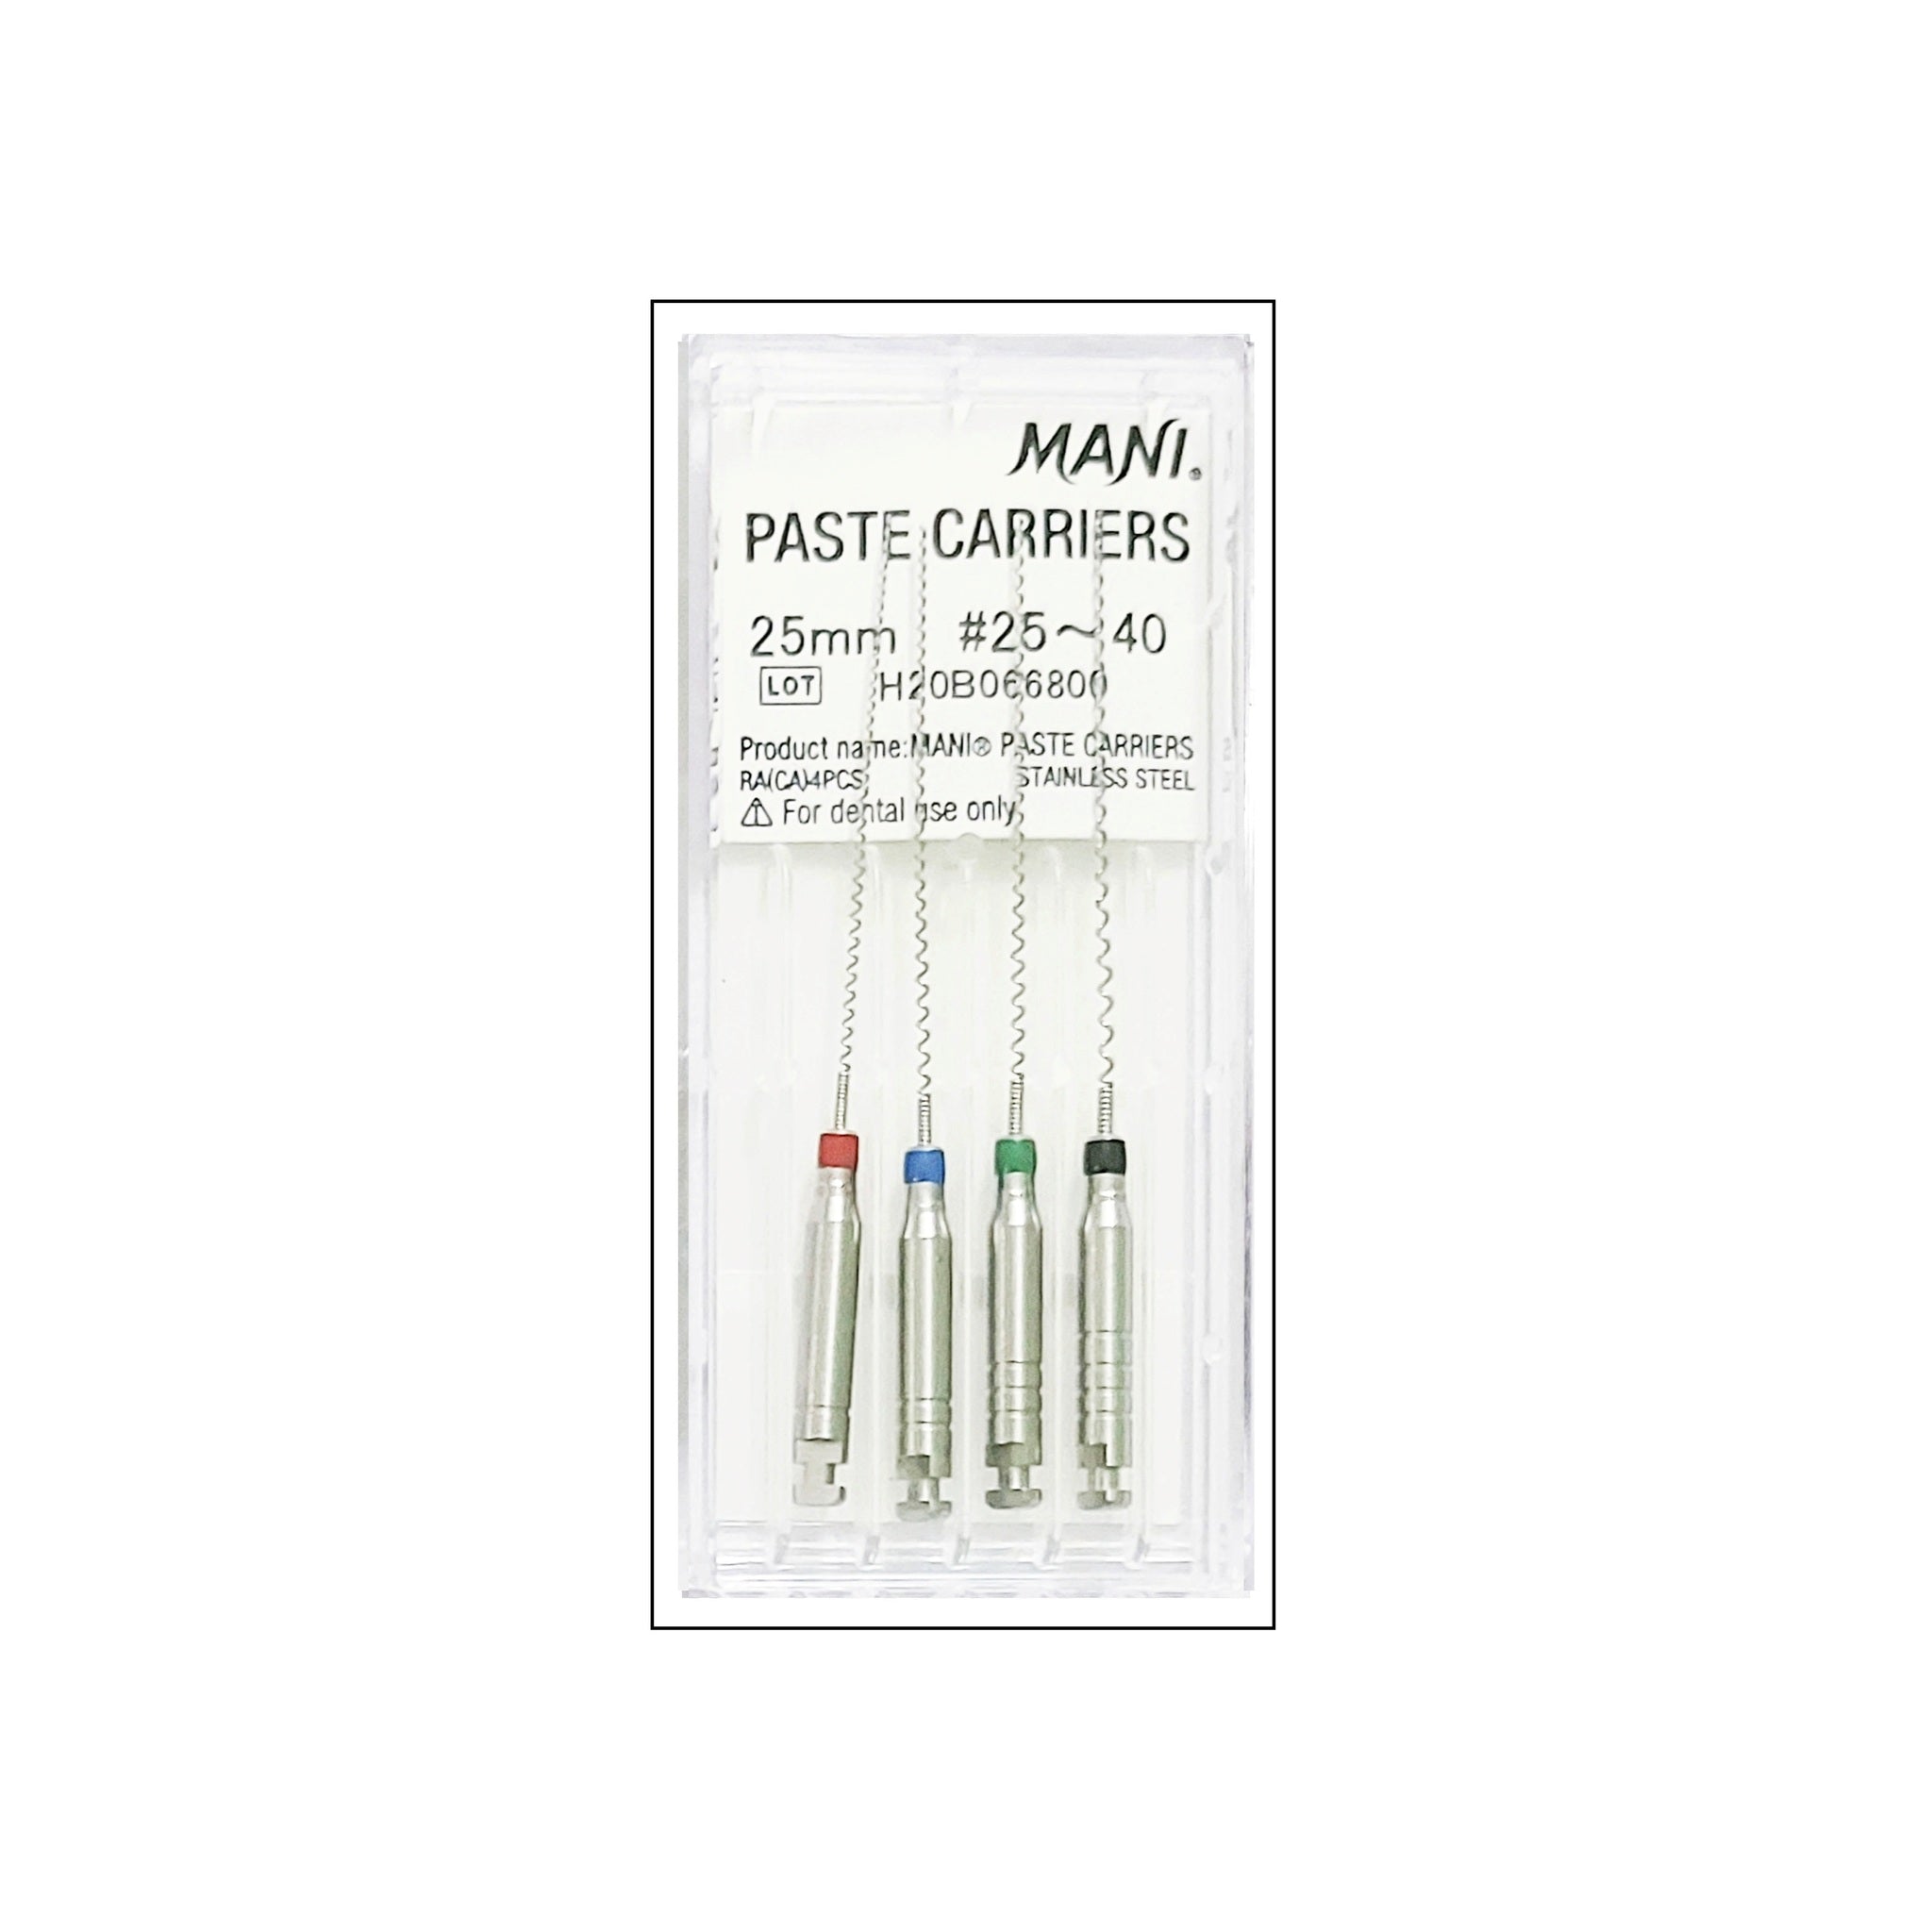 Mani Paste Carrier (Lentulo Spiral) 25mm Dental Root Canal Endodontic Files